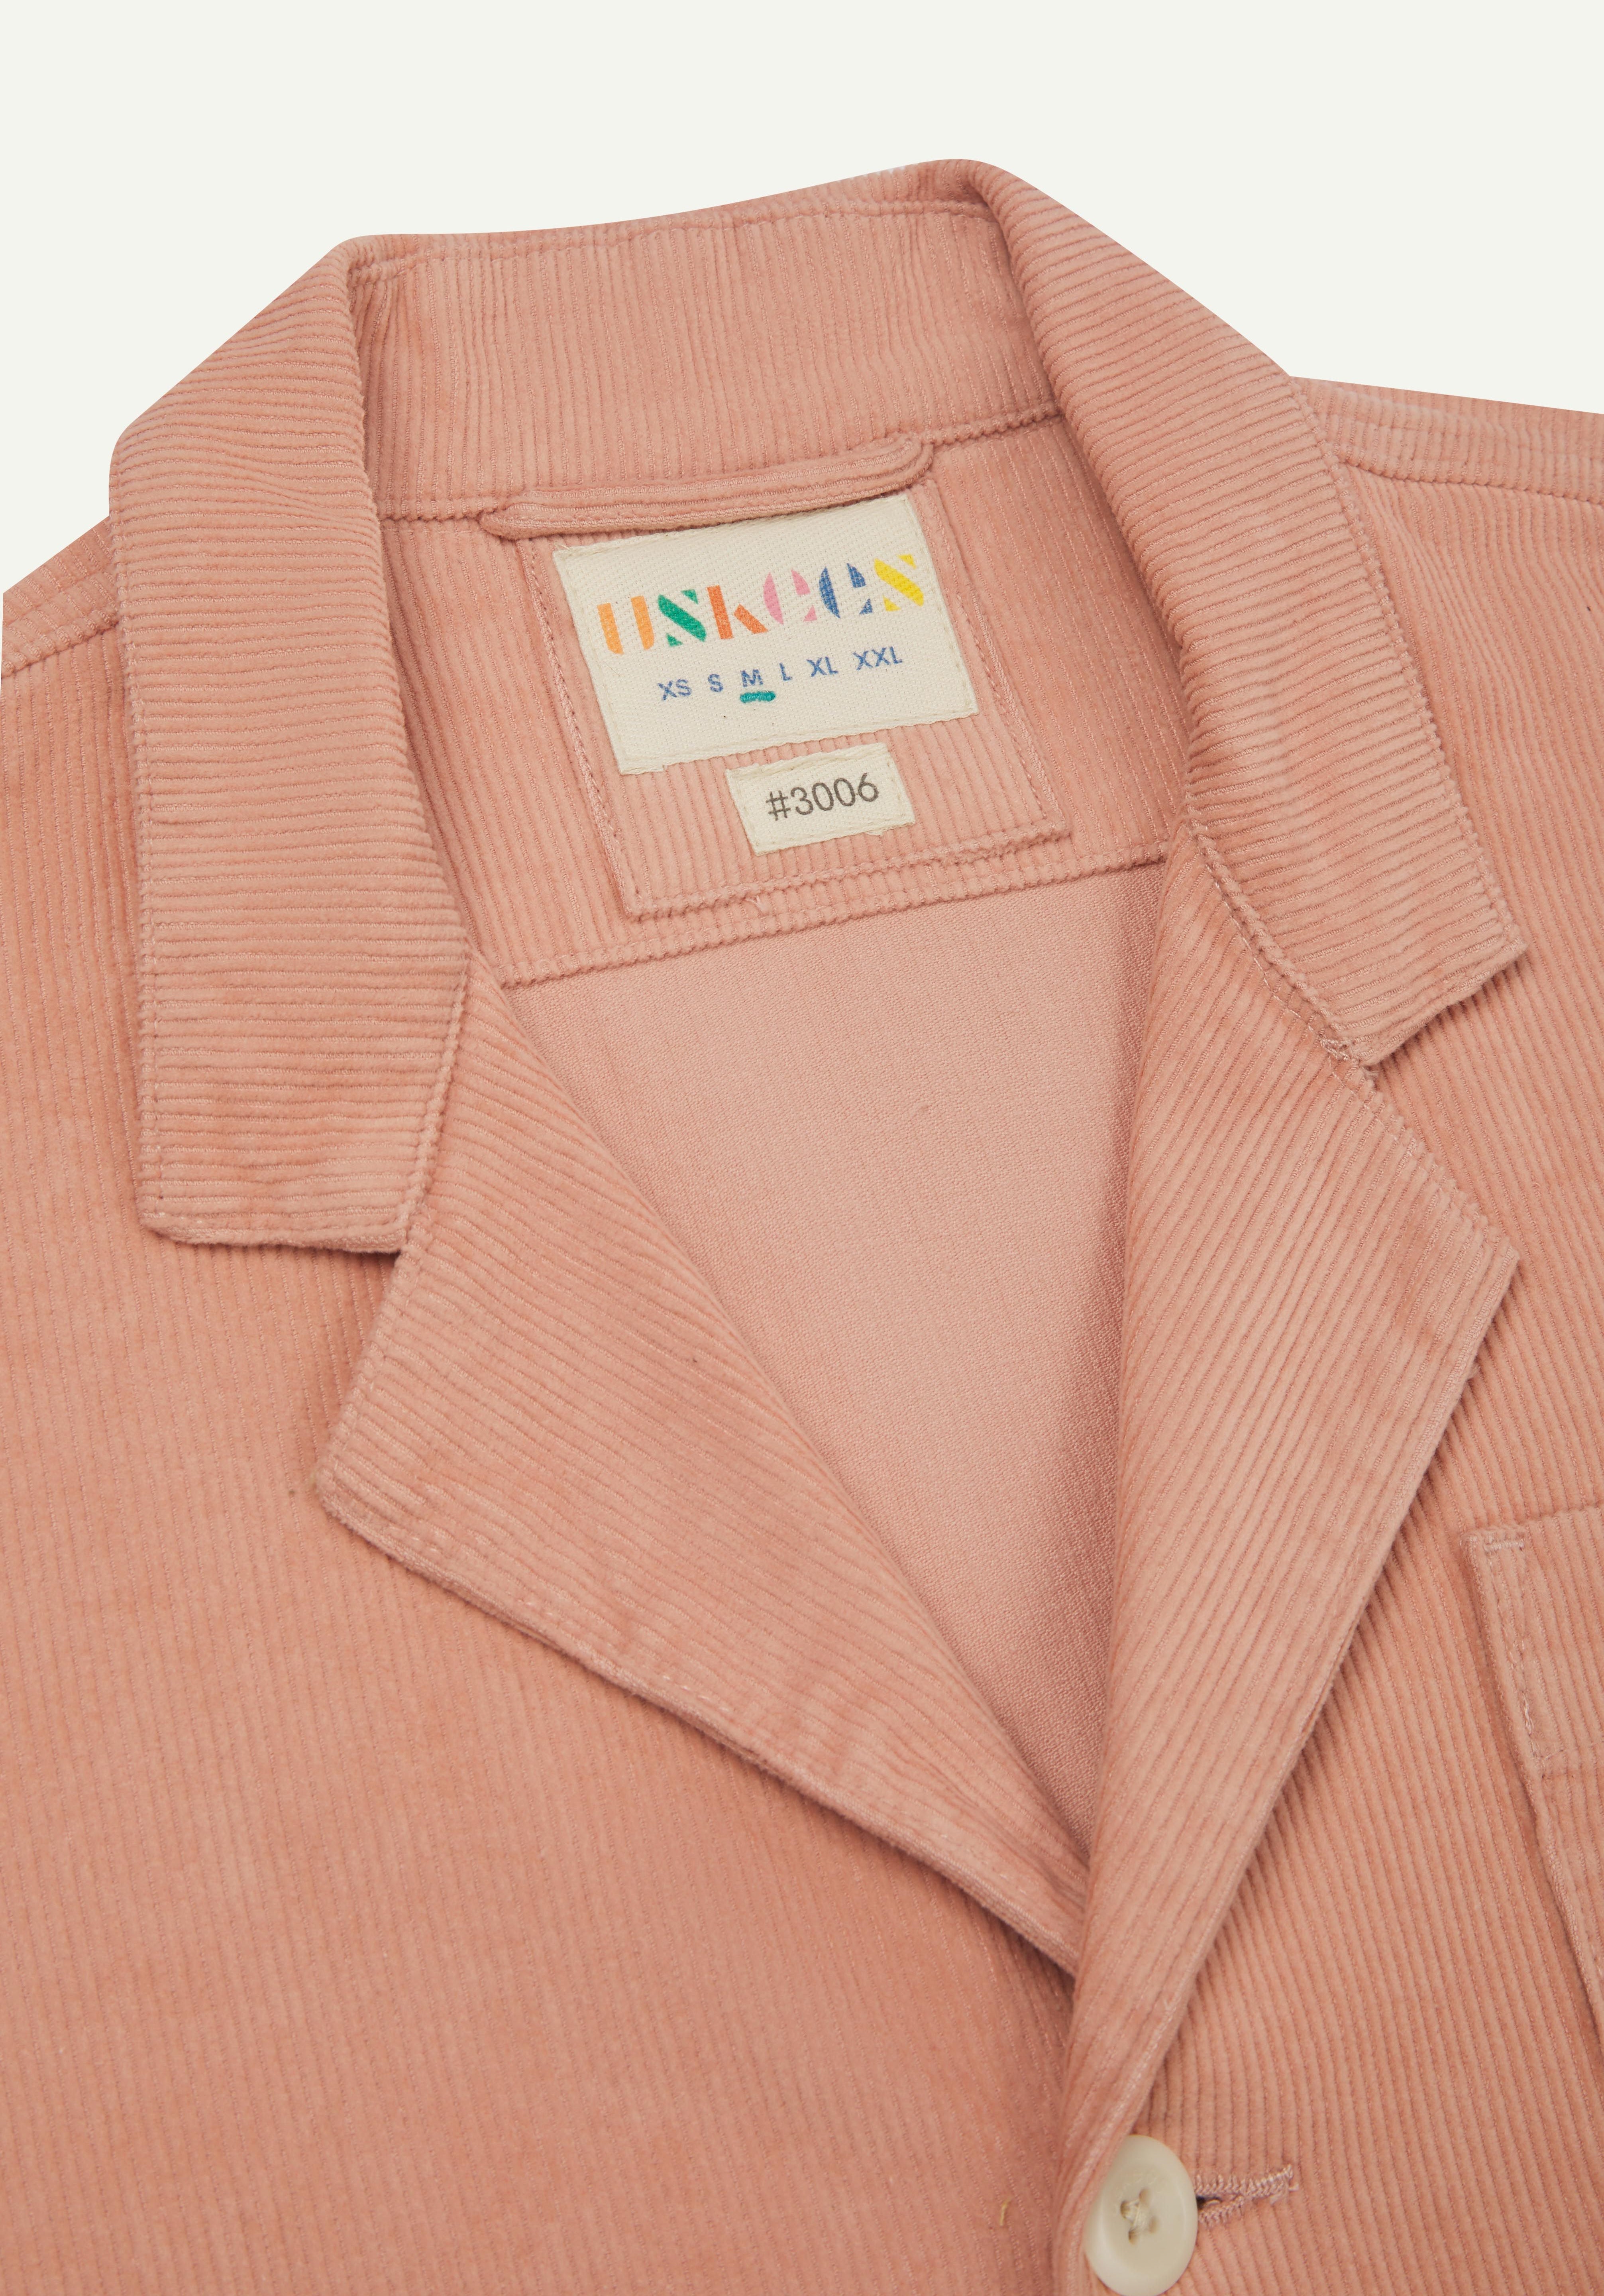 Uskees pink corduroy men's blazer close-up of collar and brand label